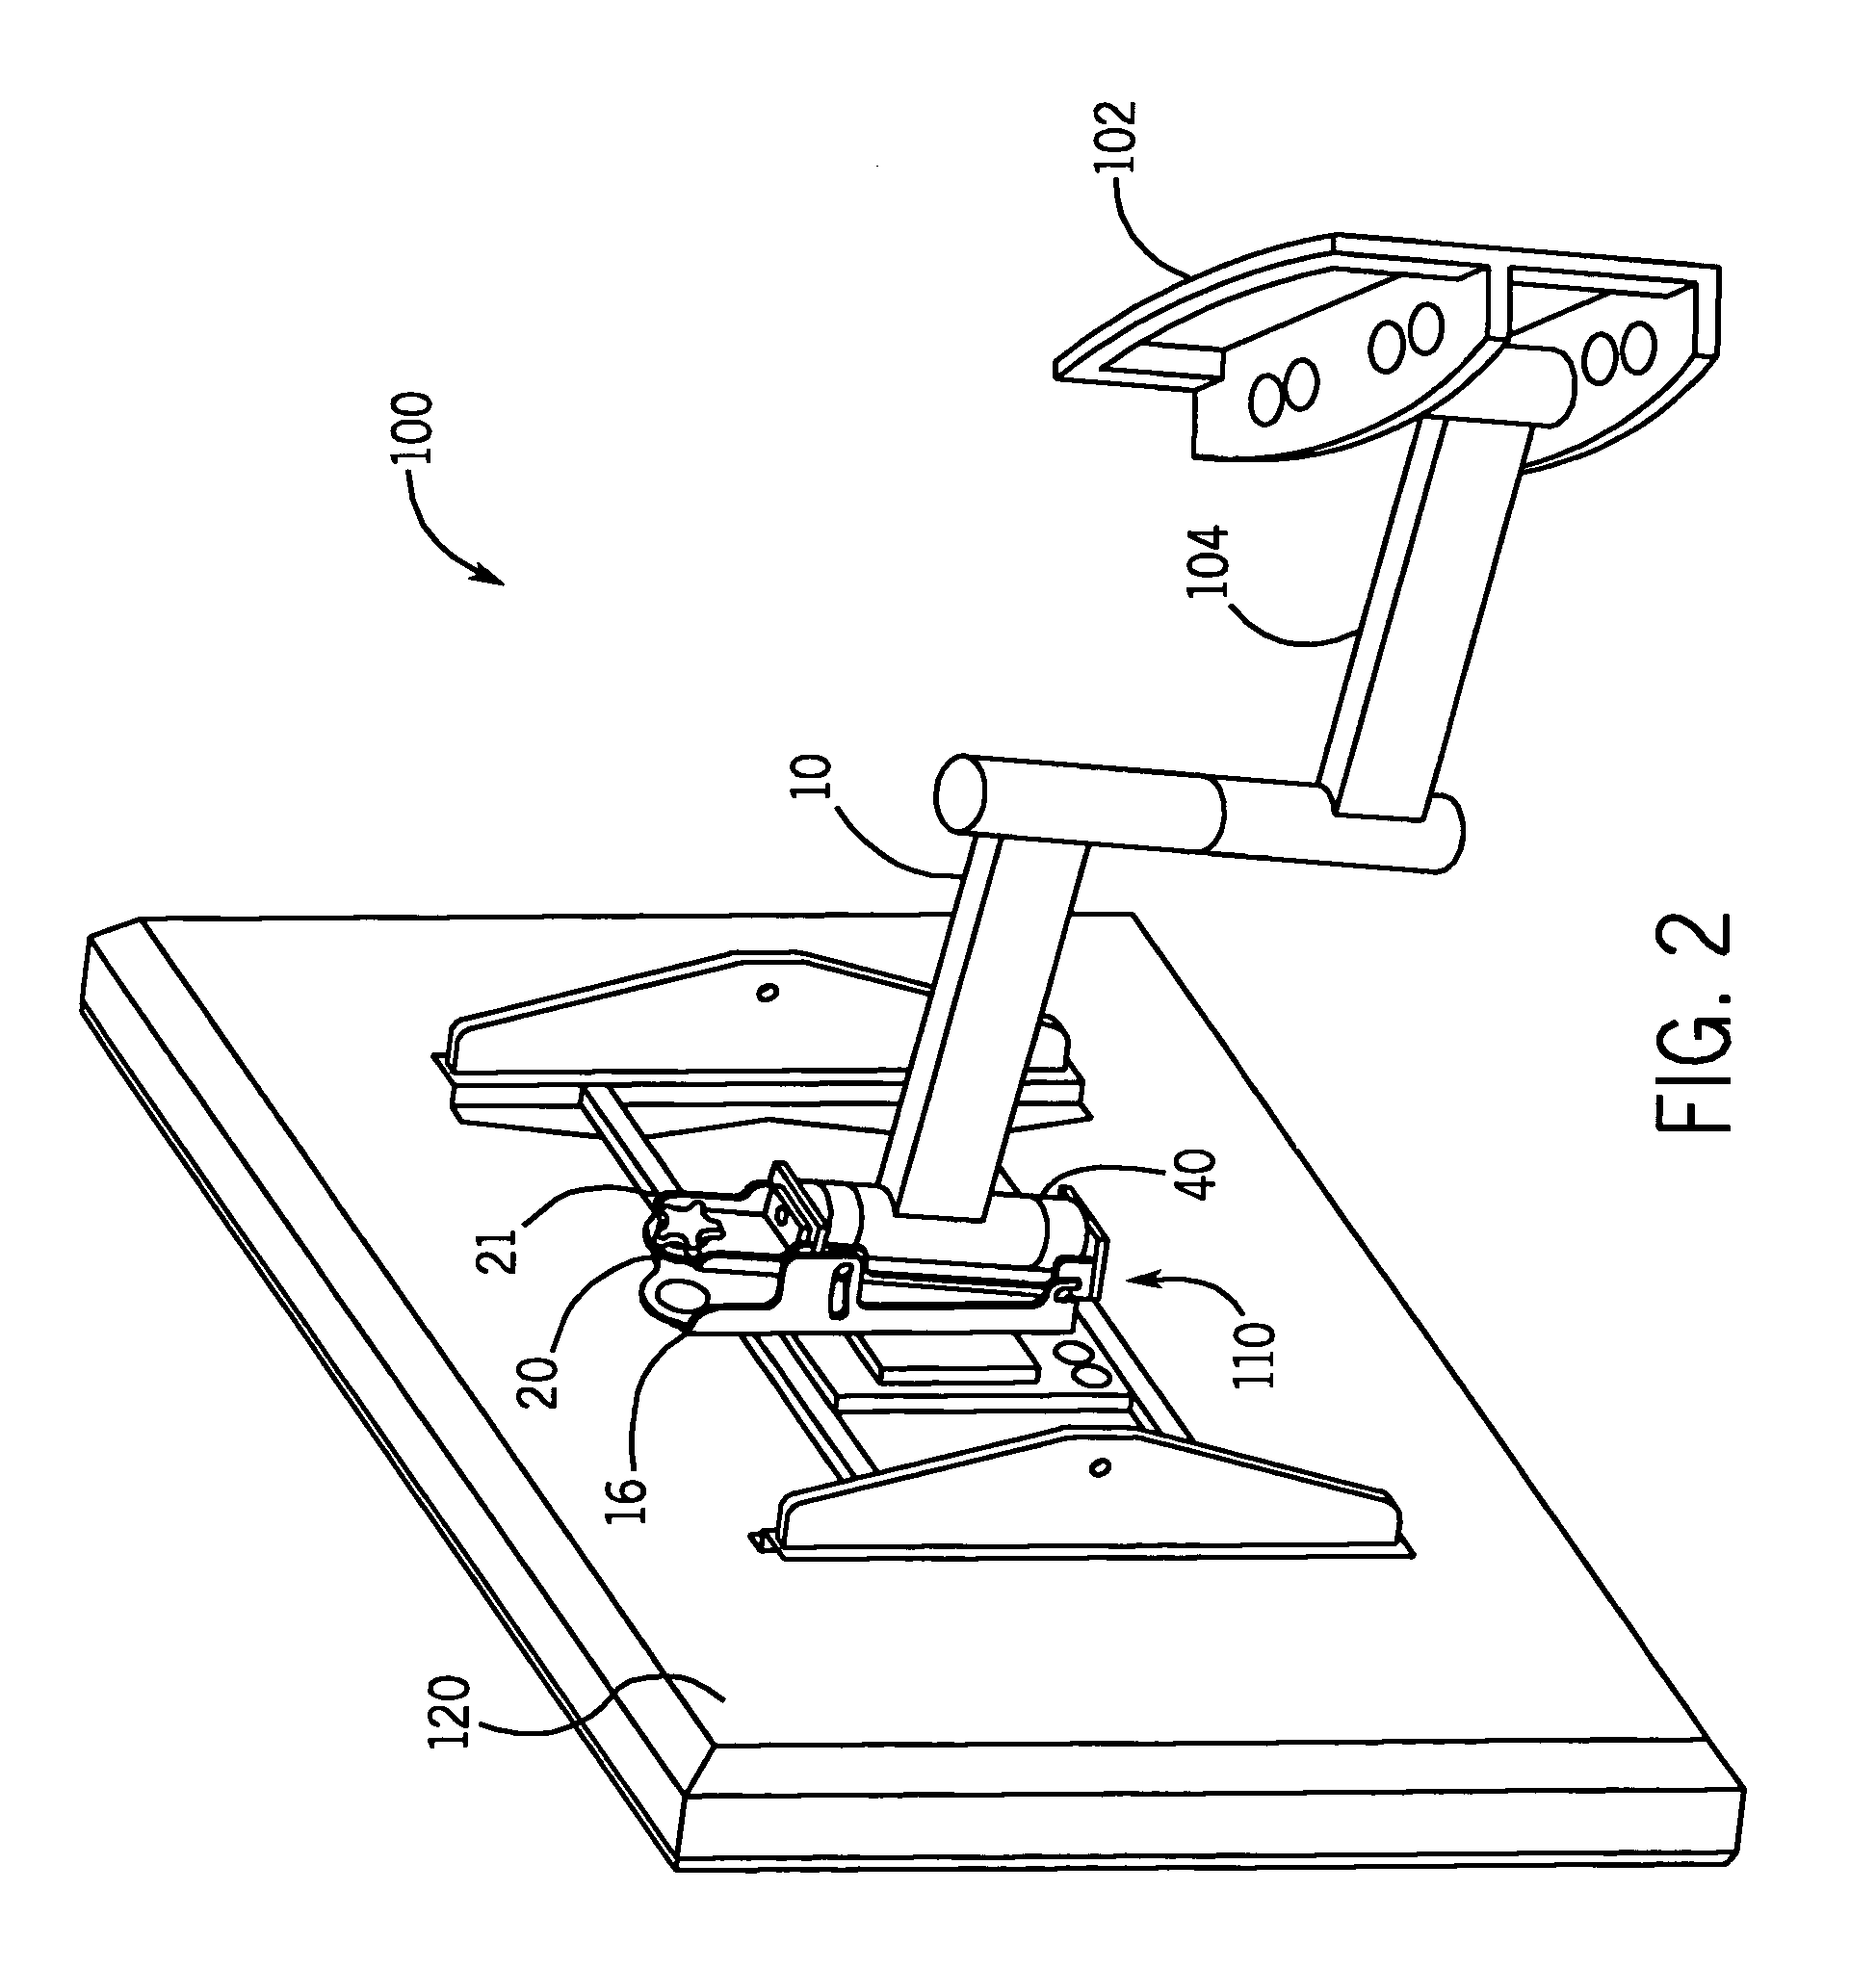 Mounting system with vertical adjustment feature